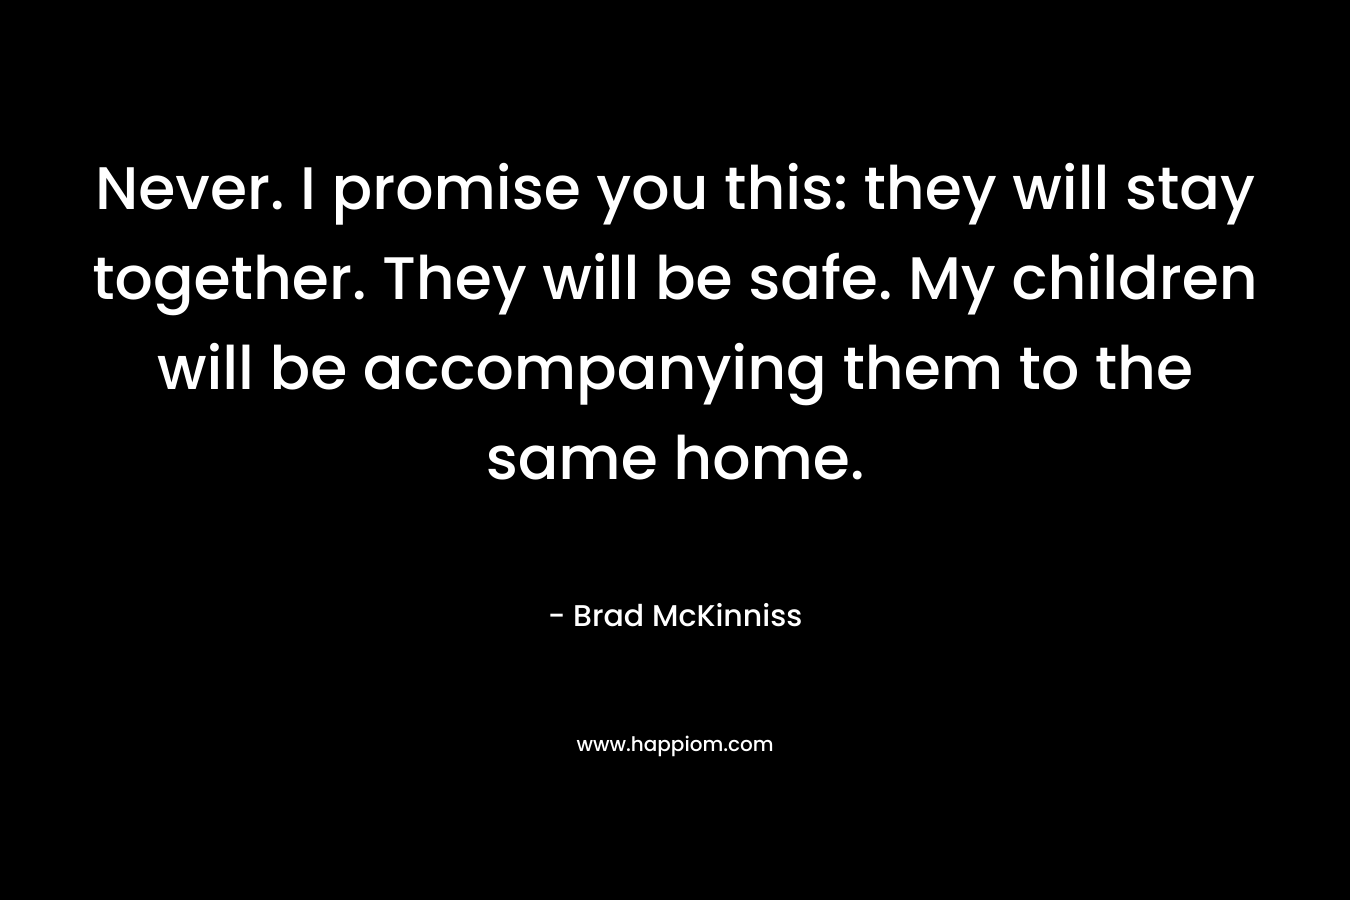 Never. I promise you this: they will stay together. They will be safe. My children will be accompanying them to the same home.